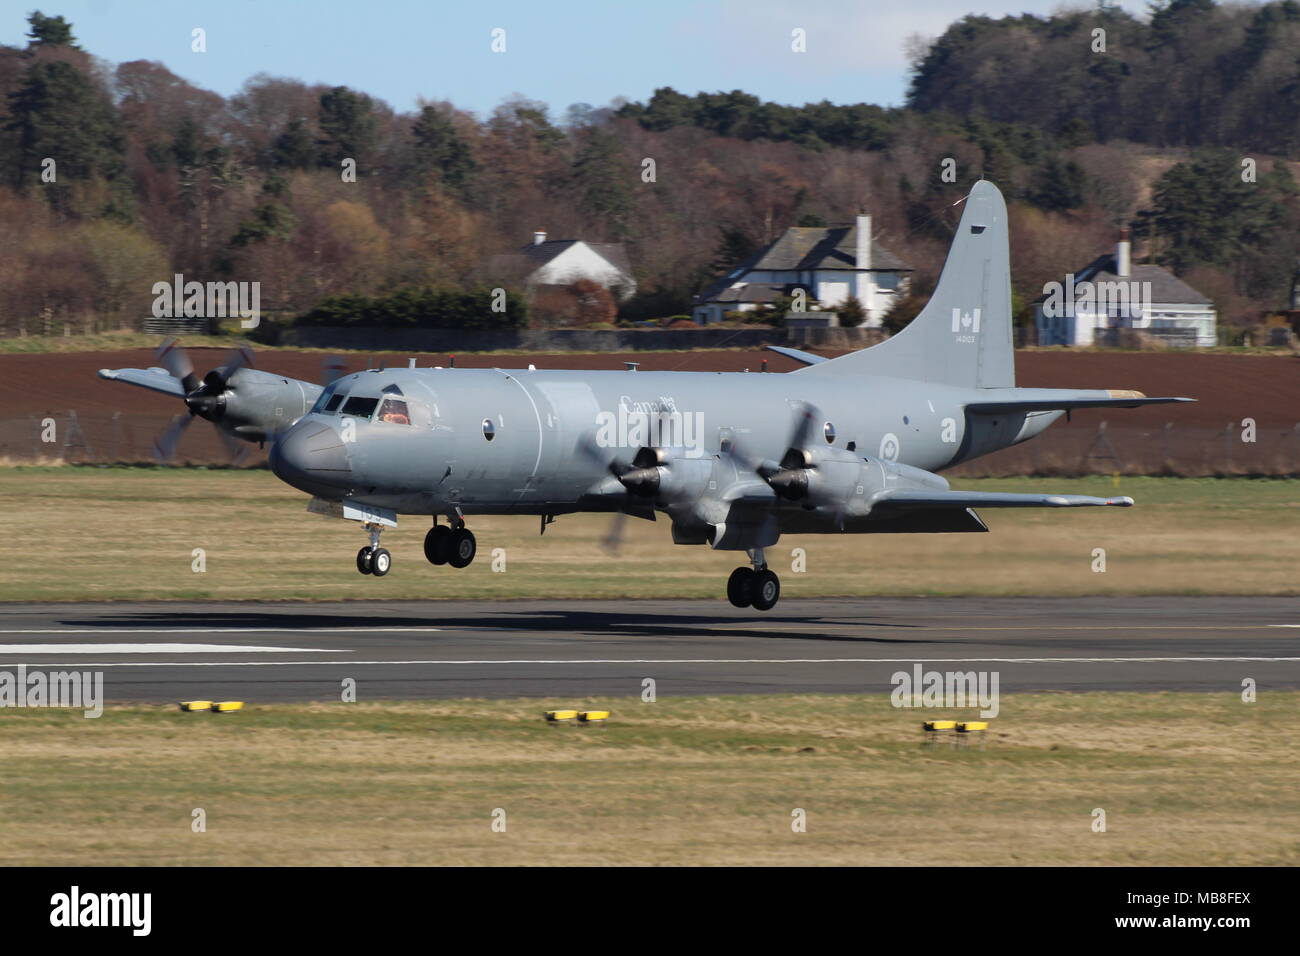 130103, a Lockheed CP-140 Aurora operated by the Royal Canadian Air Force, at Prestwick Airport in Ayrshire. Stock Photo